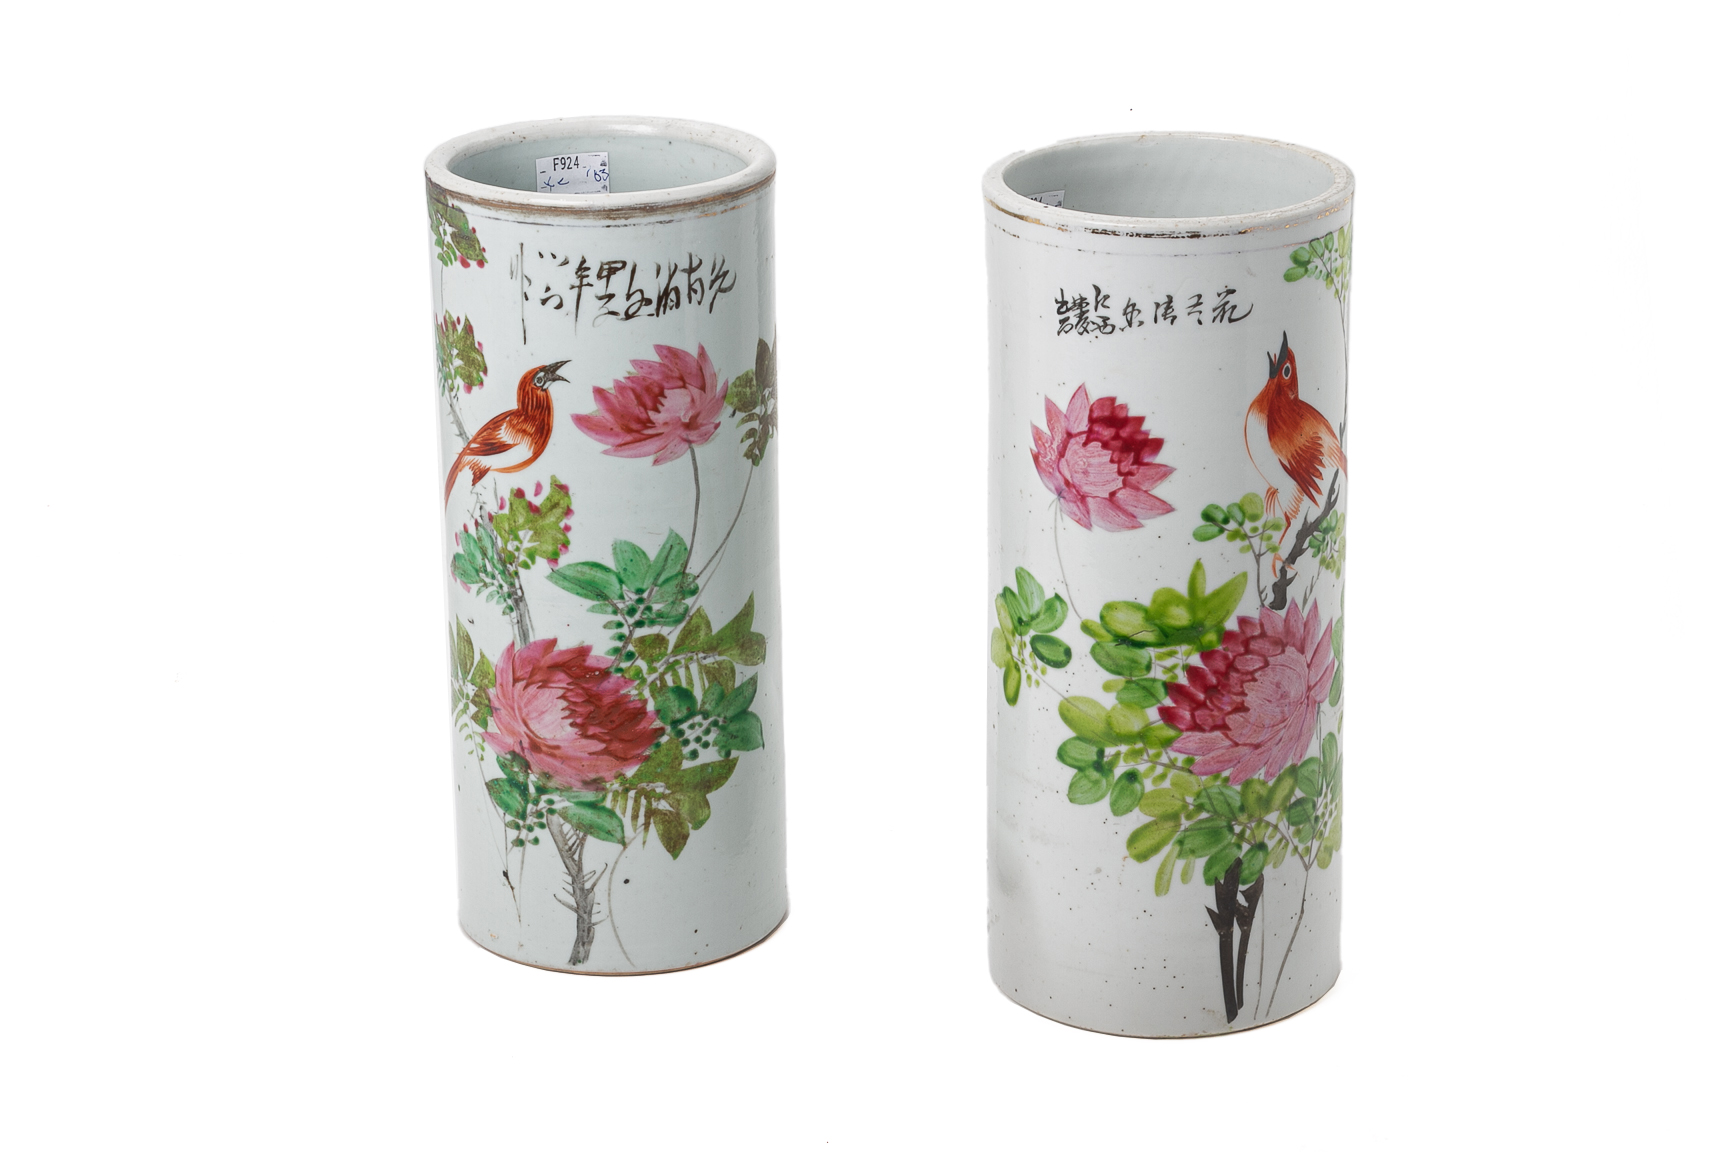 A PAIR OF FAMILLE ROSE PORCELAIN CYLINDRICAL VASES - Image 3 of 3